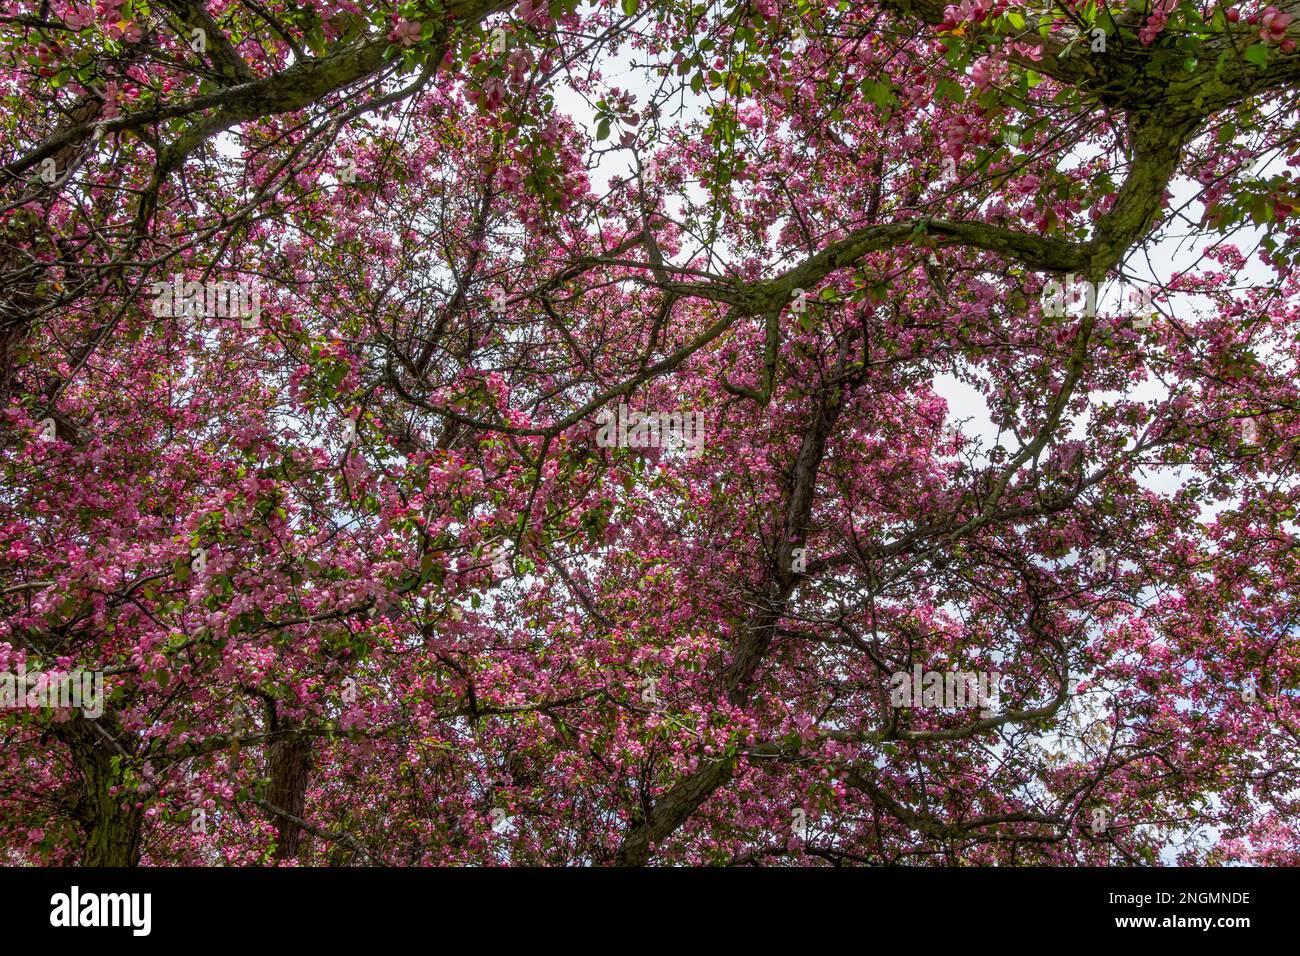 Pink blossoms loom overhead in a gigantic crabapple tree. Stock Photo